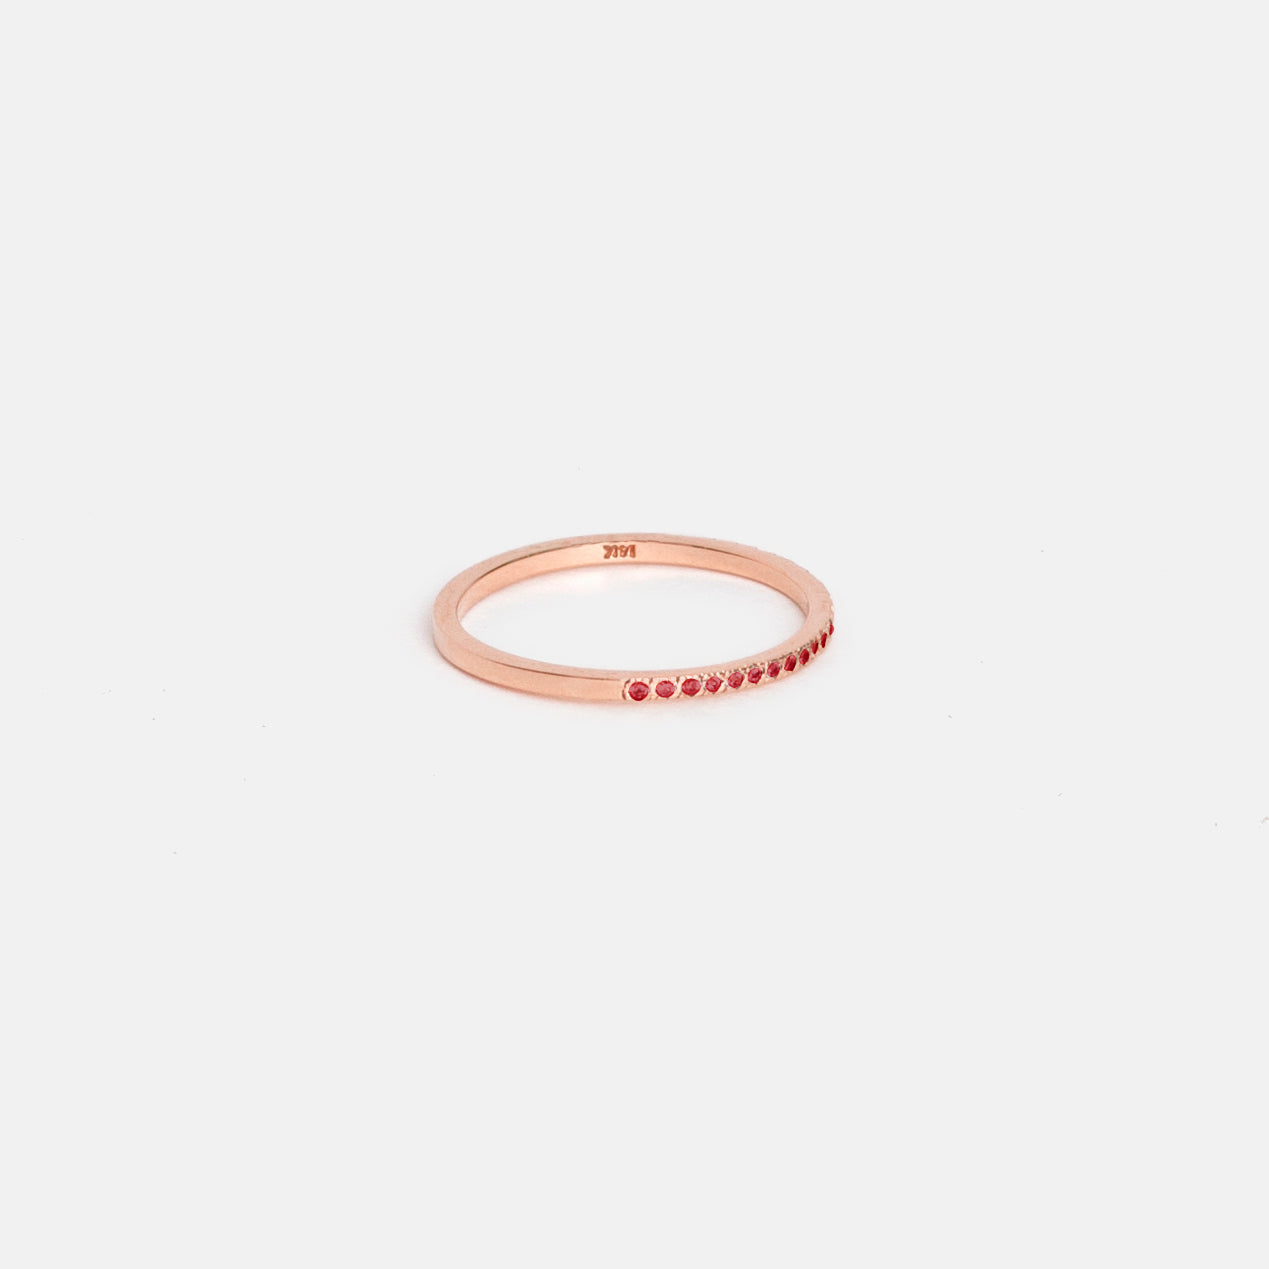 Eile Alternative Ring in 14k Rose Gold set with Rubies By SHW Fine Jewelry NYC